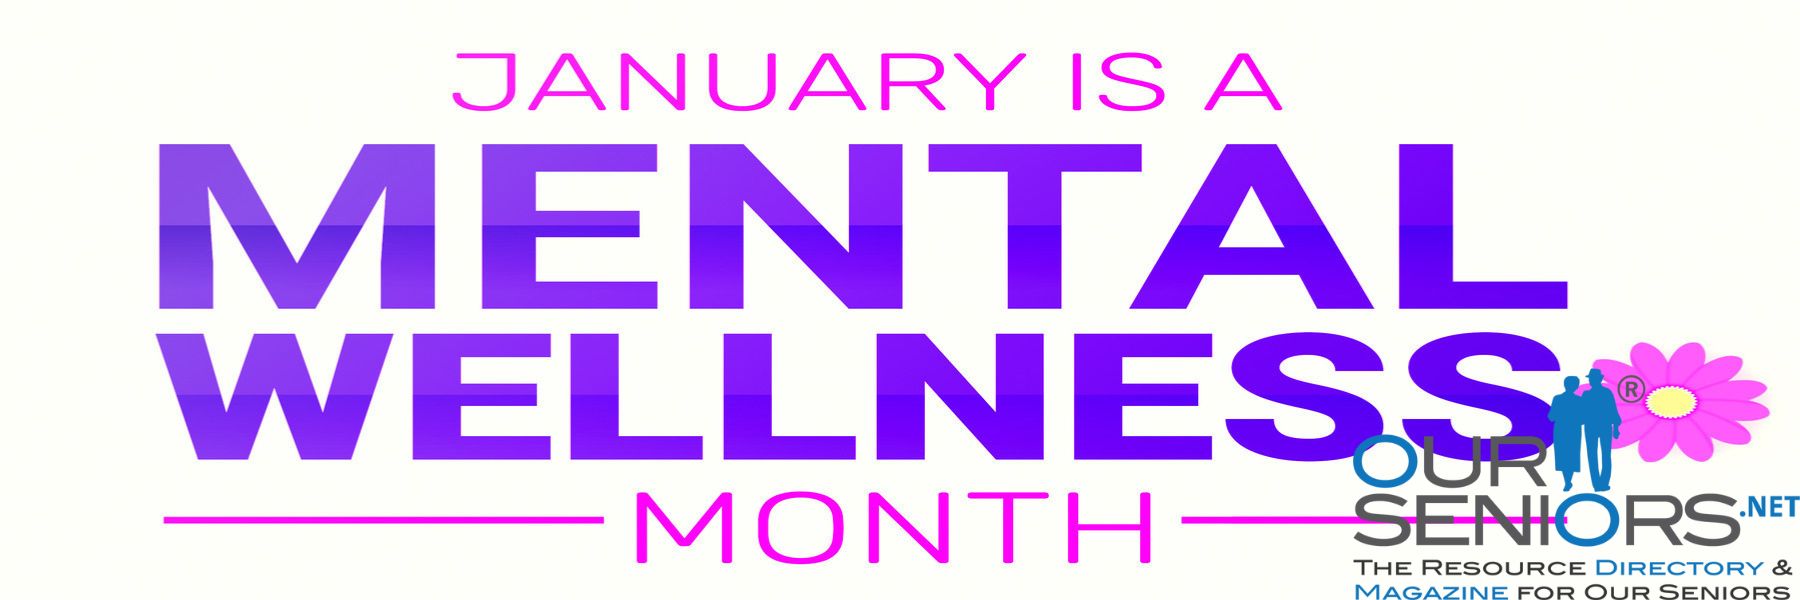 January is Mental Wellness Month: It's the perfect time to shift